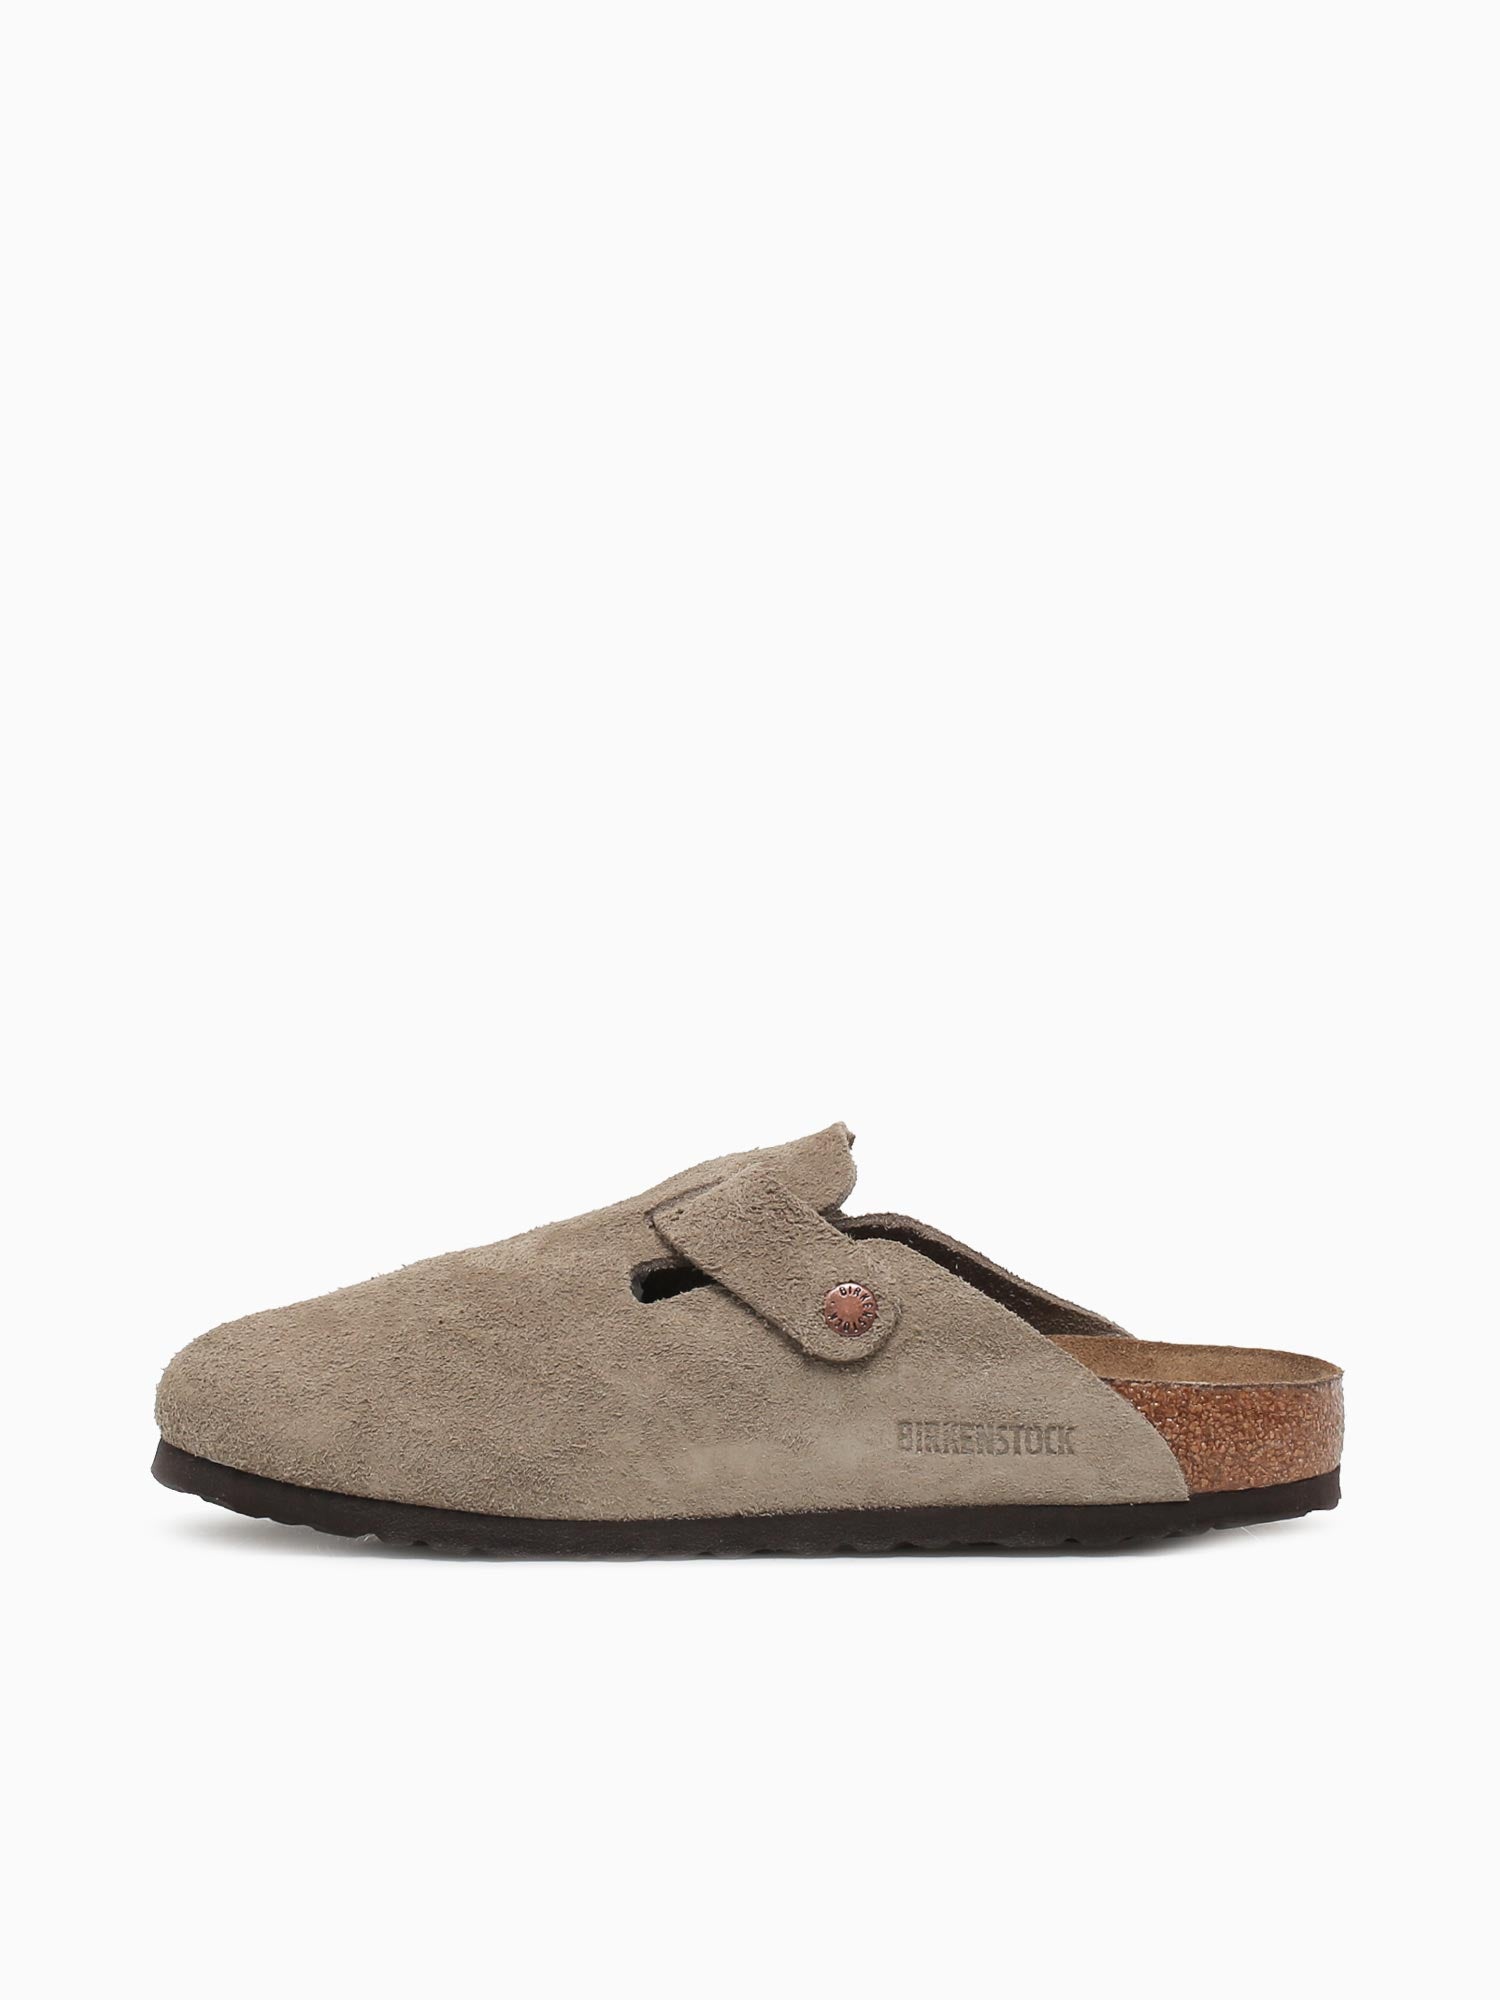 Boston Soft Footbed  Taupe Suede Taupe / 40 / M